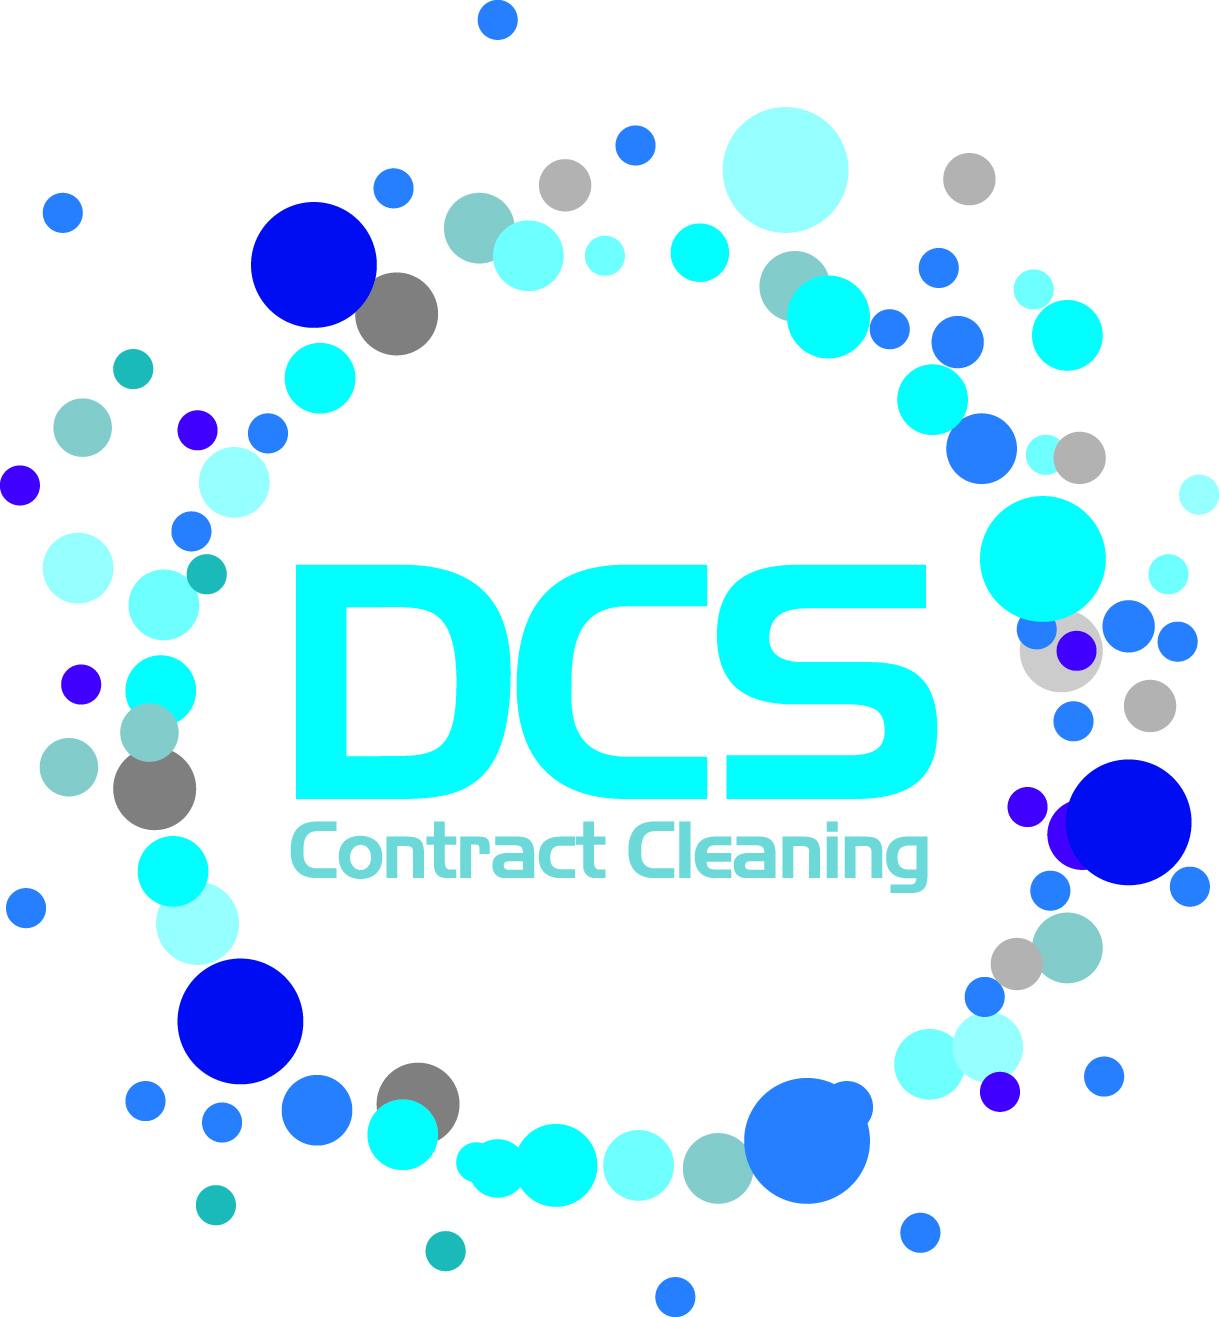 Dedman Contract Cleaning Services